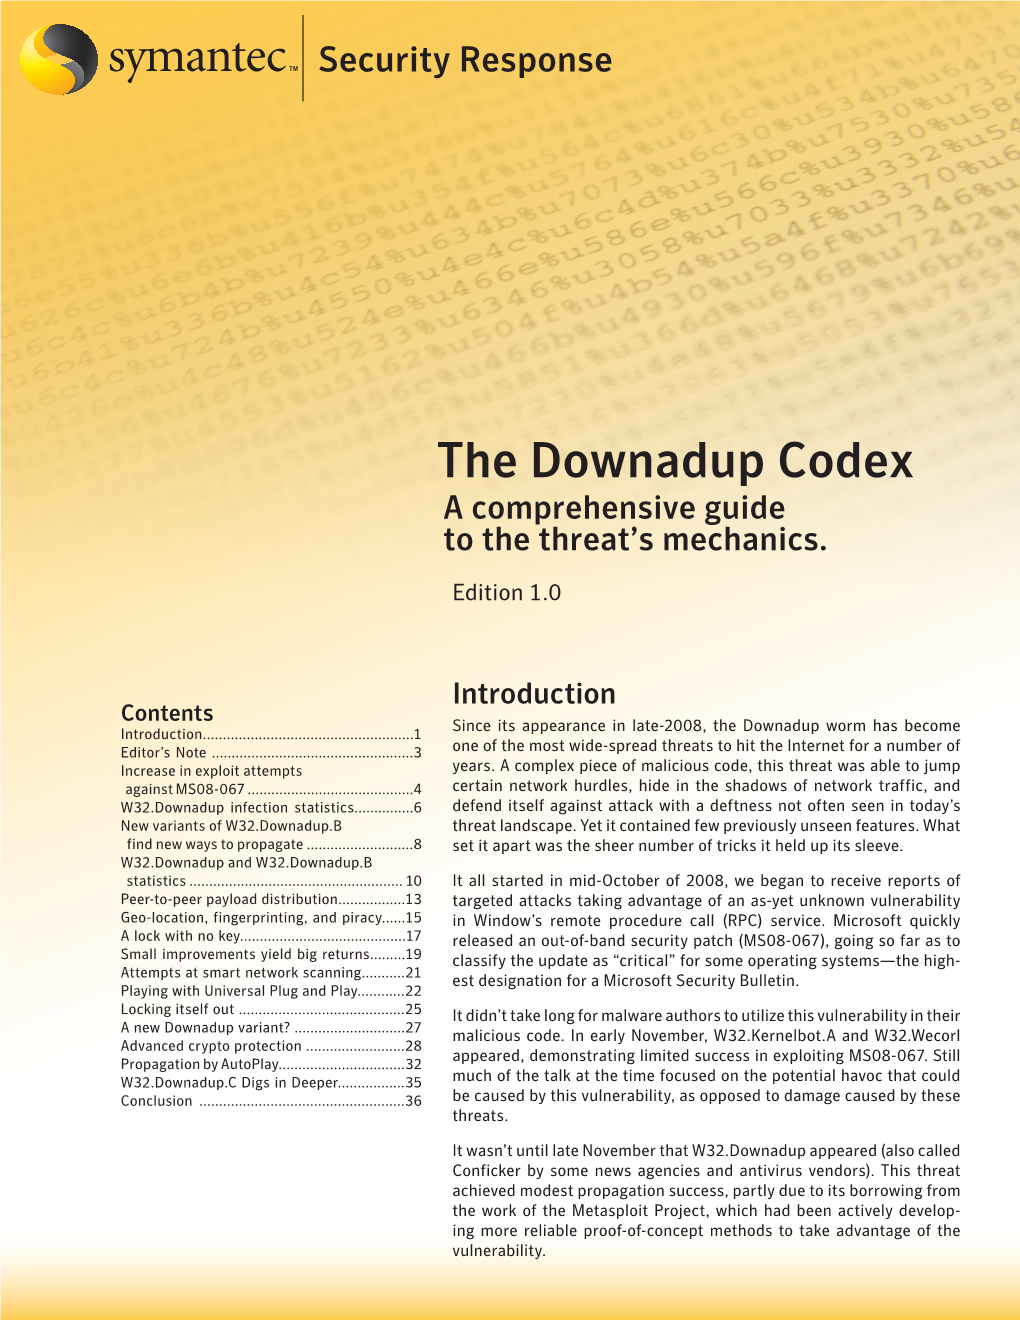 The Downadup Codex a Comprehensive Guide to the Threat’S Mechanics